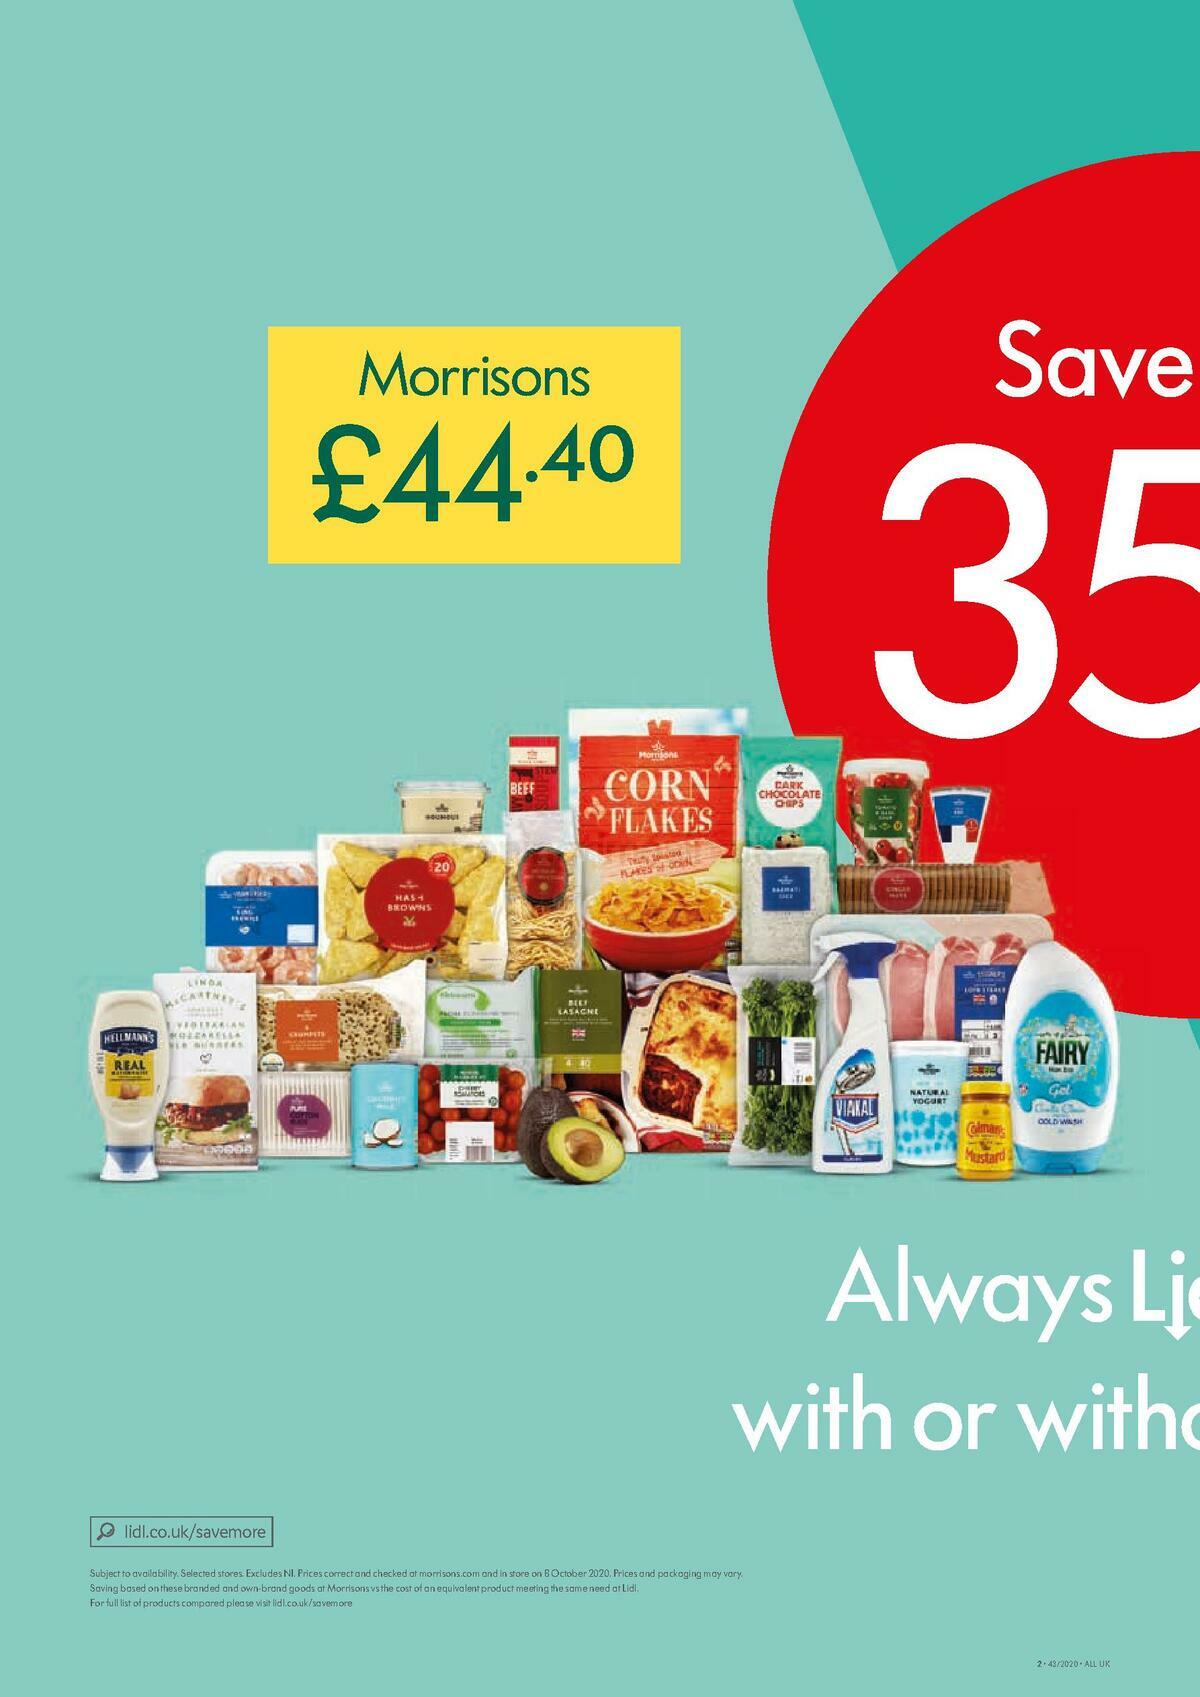 LIDL Offers from 22 October